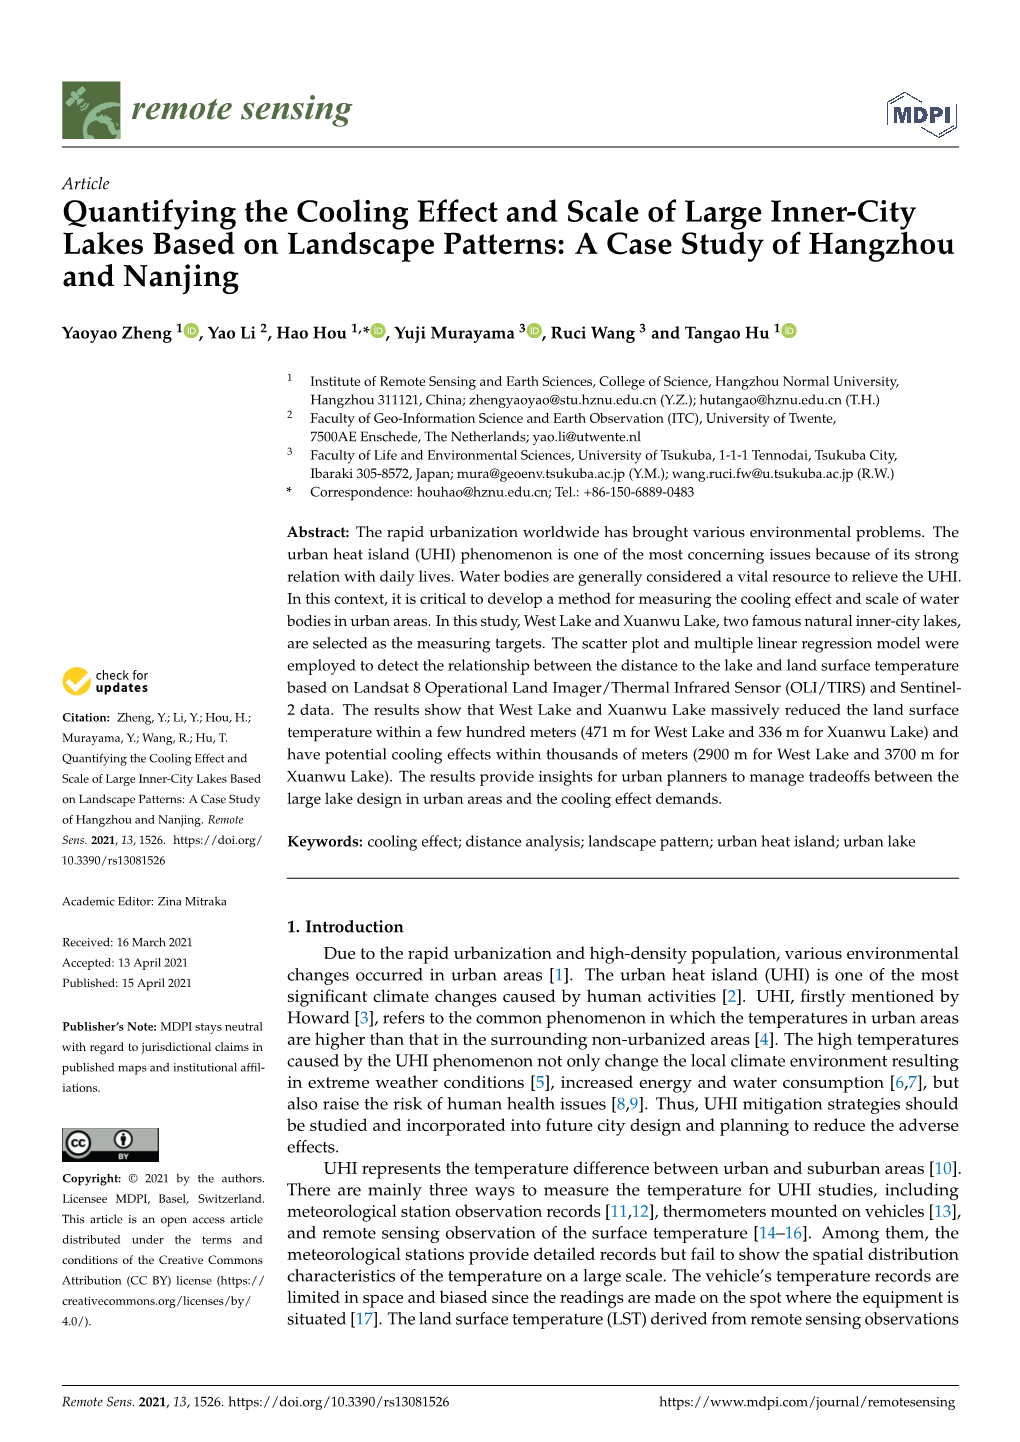 Quantifying the Cooling Effect and Scale of Large Inner-City Lakes Based on Landscape Patterns: a Case Study of Hangzhou and Nanjing